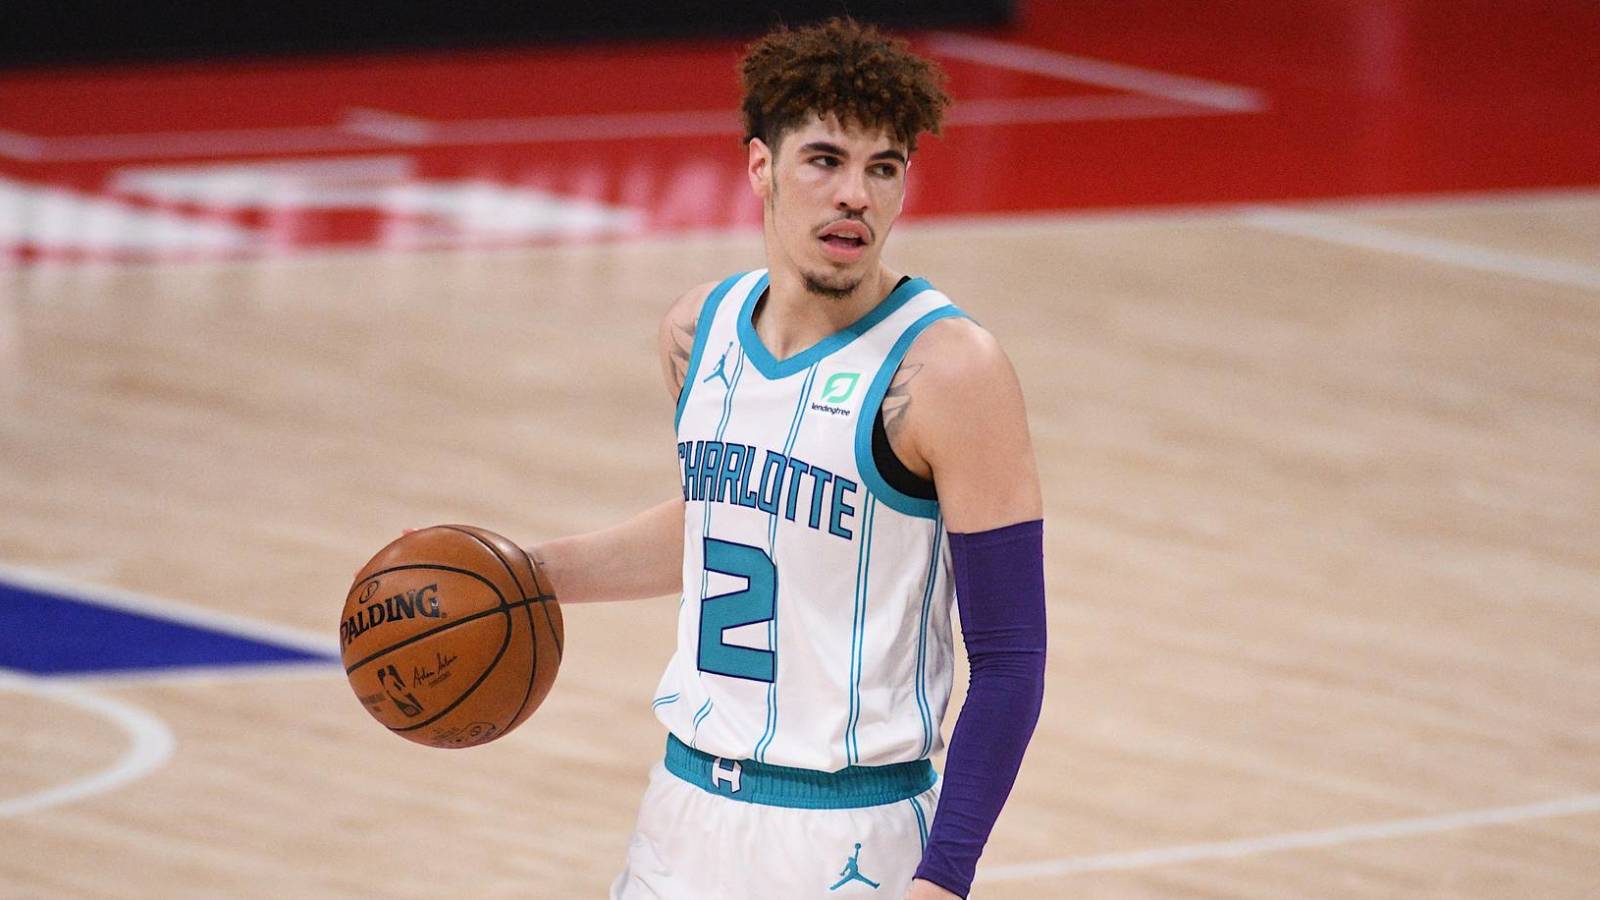 Hornets' LaMelo Ball named 2020-21 NBA Rookie of the Year